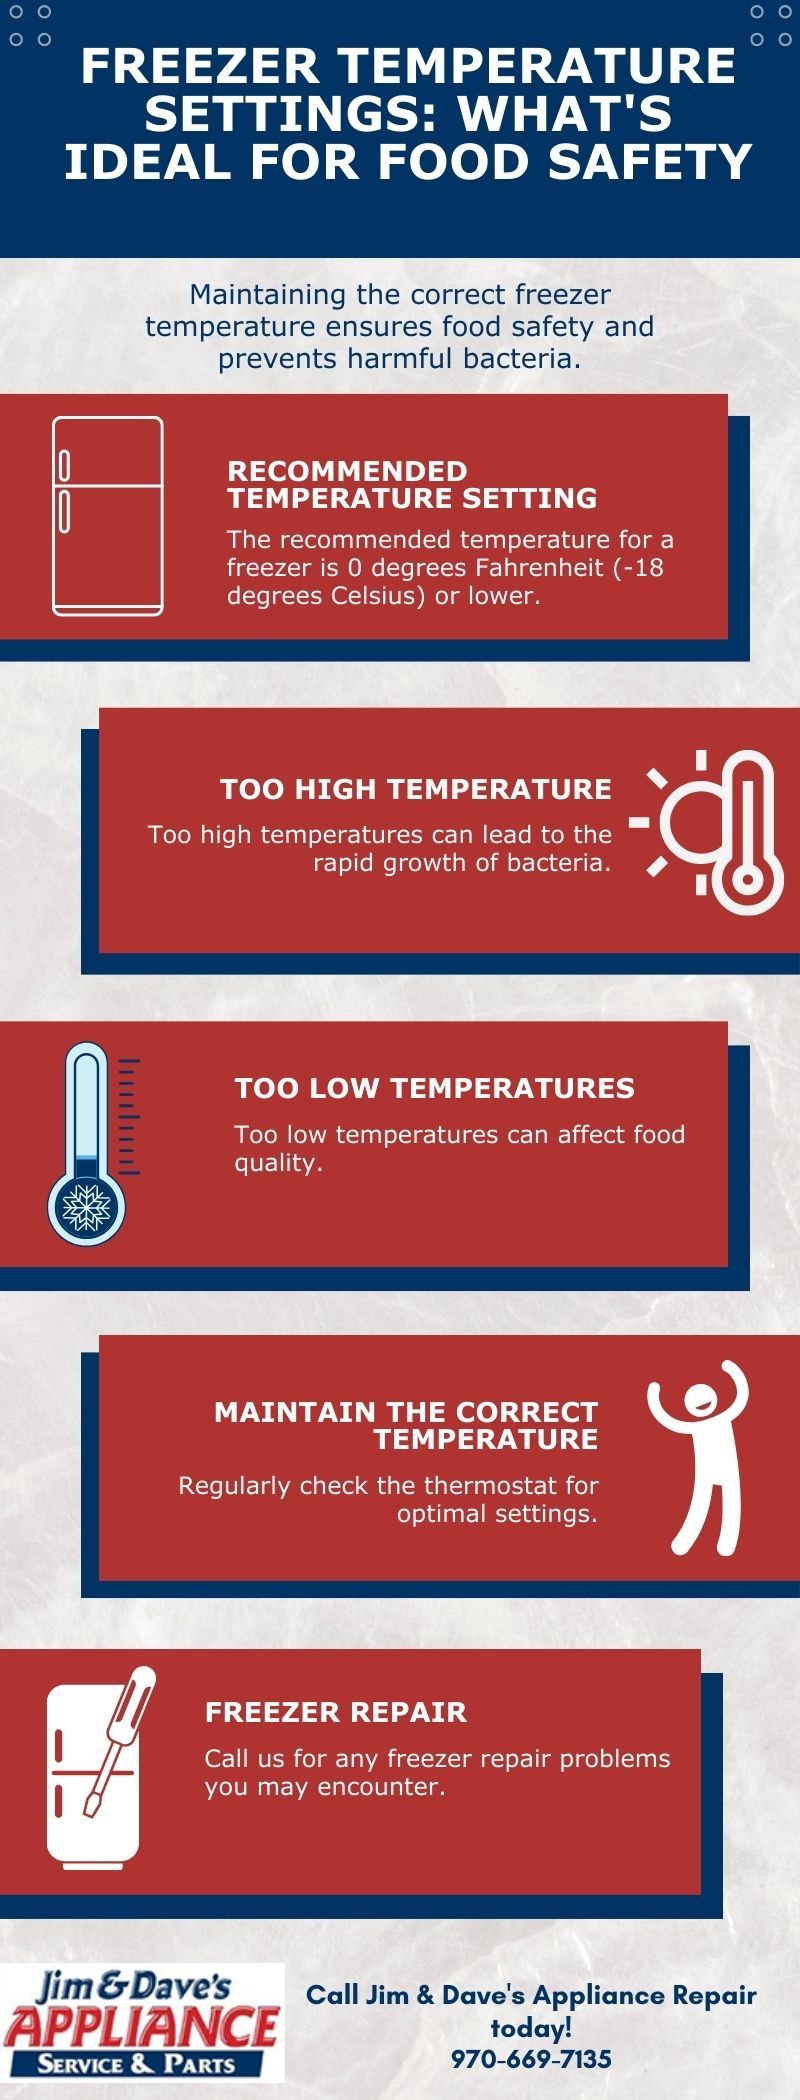 M26506 - Infographic - Freezer Temperature Settings What_s Ideal for Food Safety.jpg